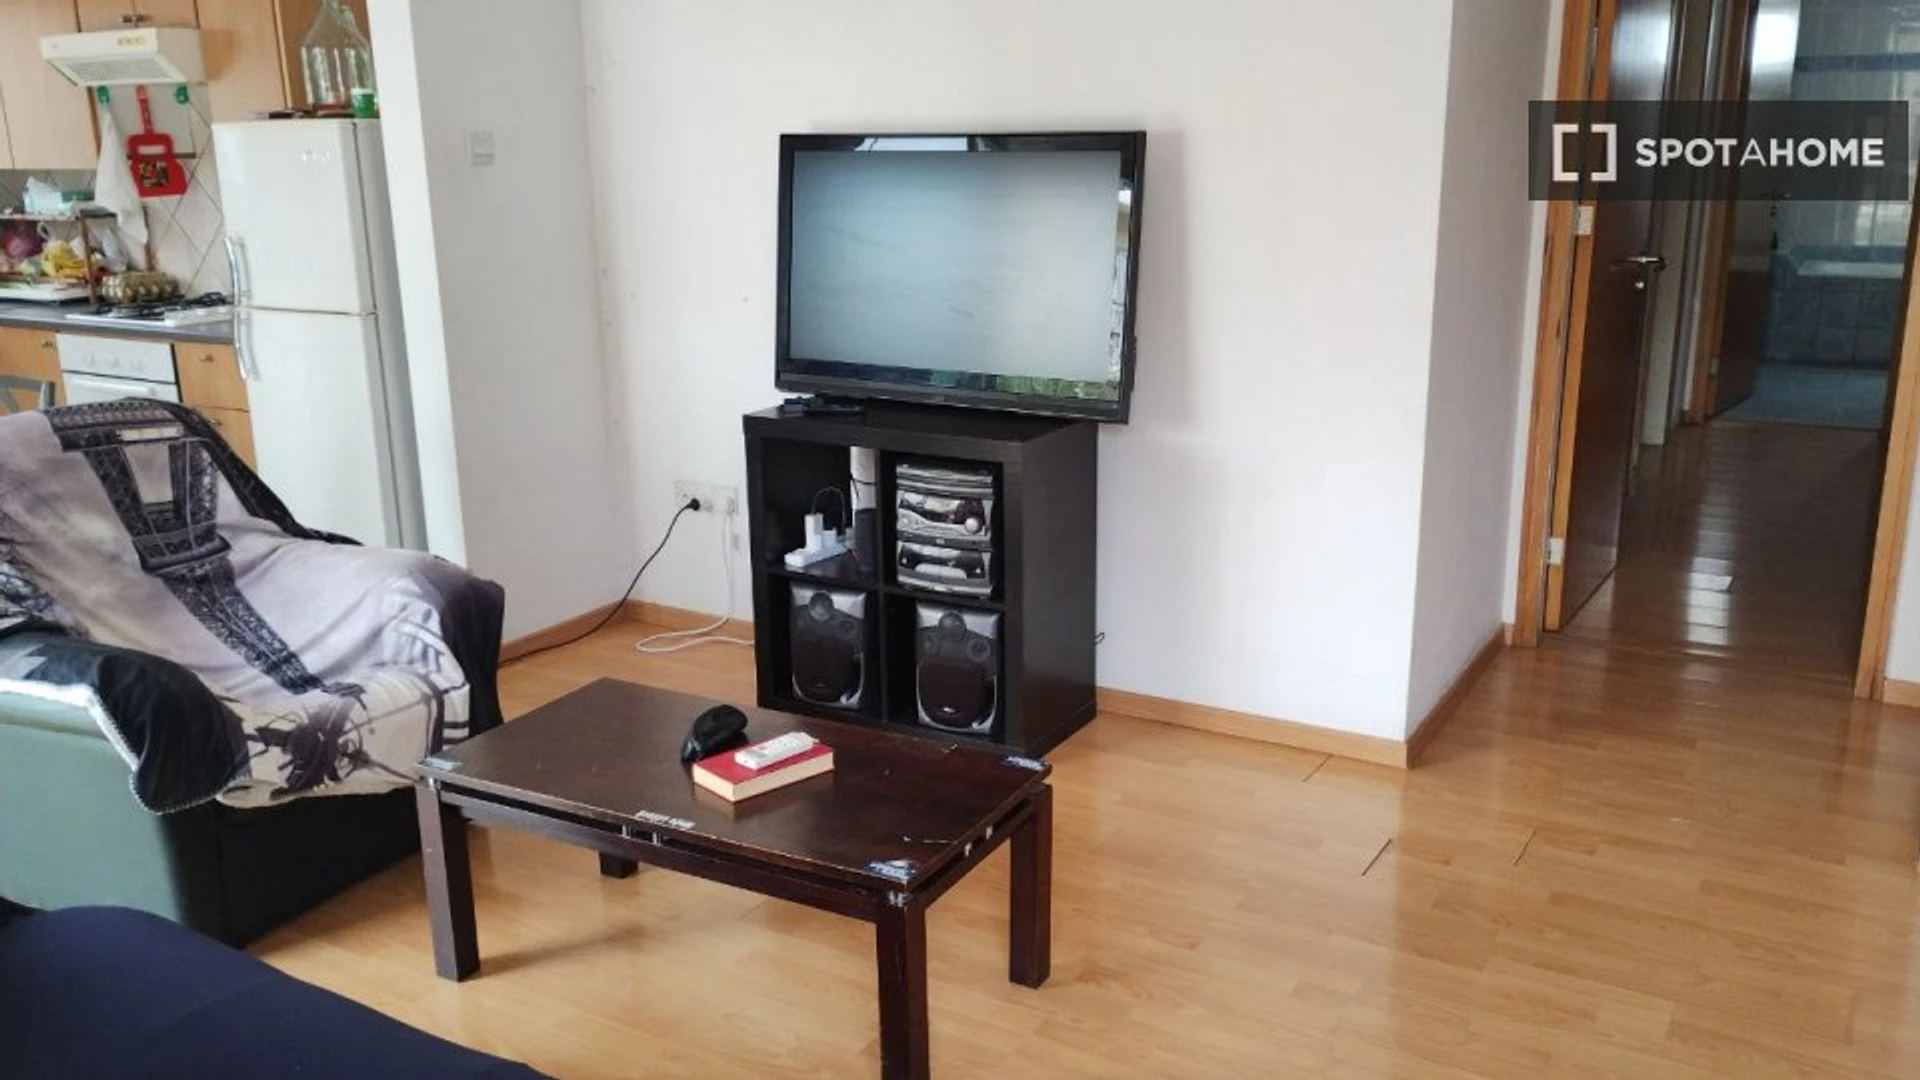 Room for rent in a shared flat in Nicosia